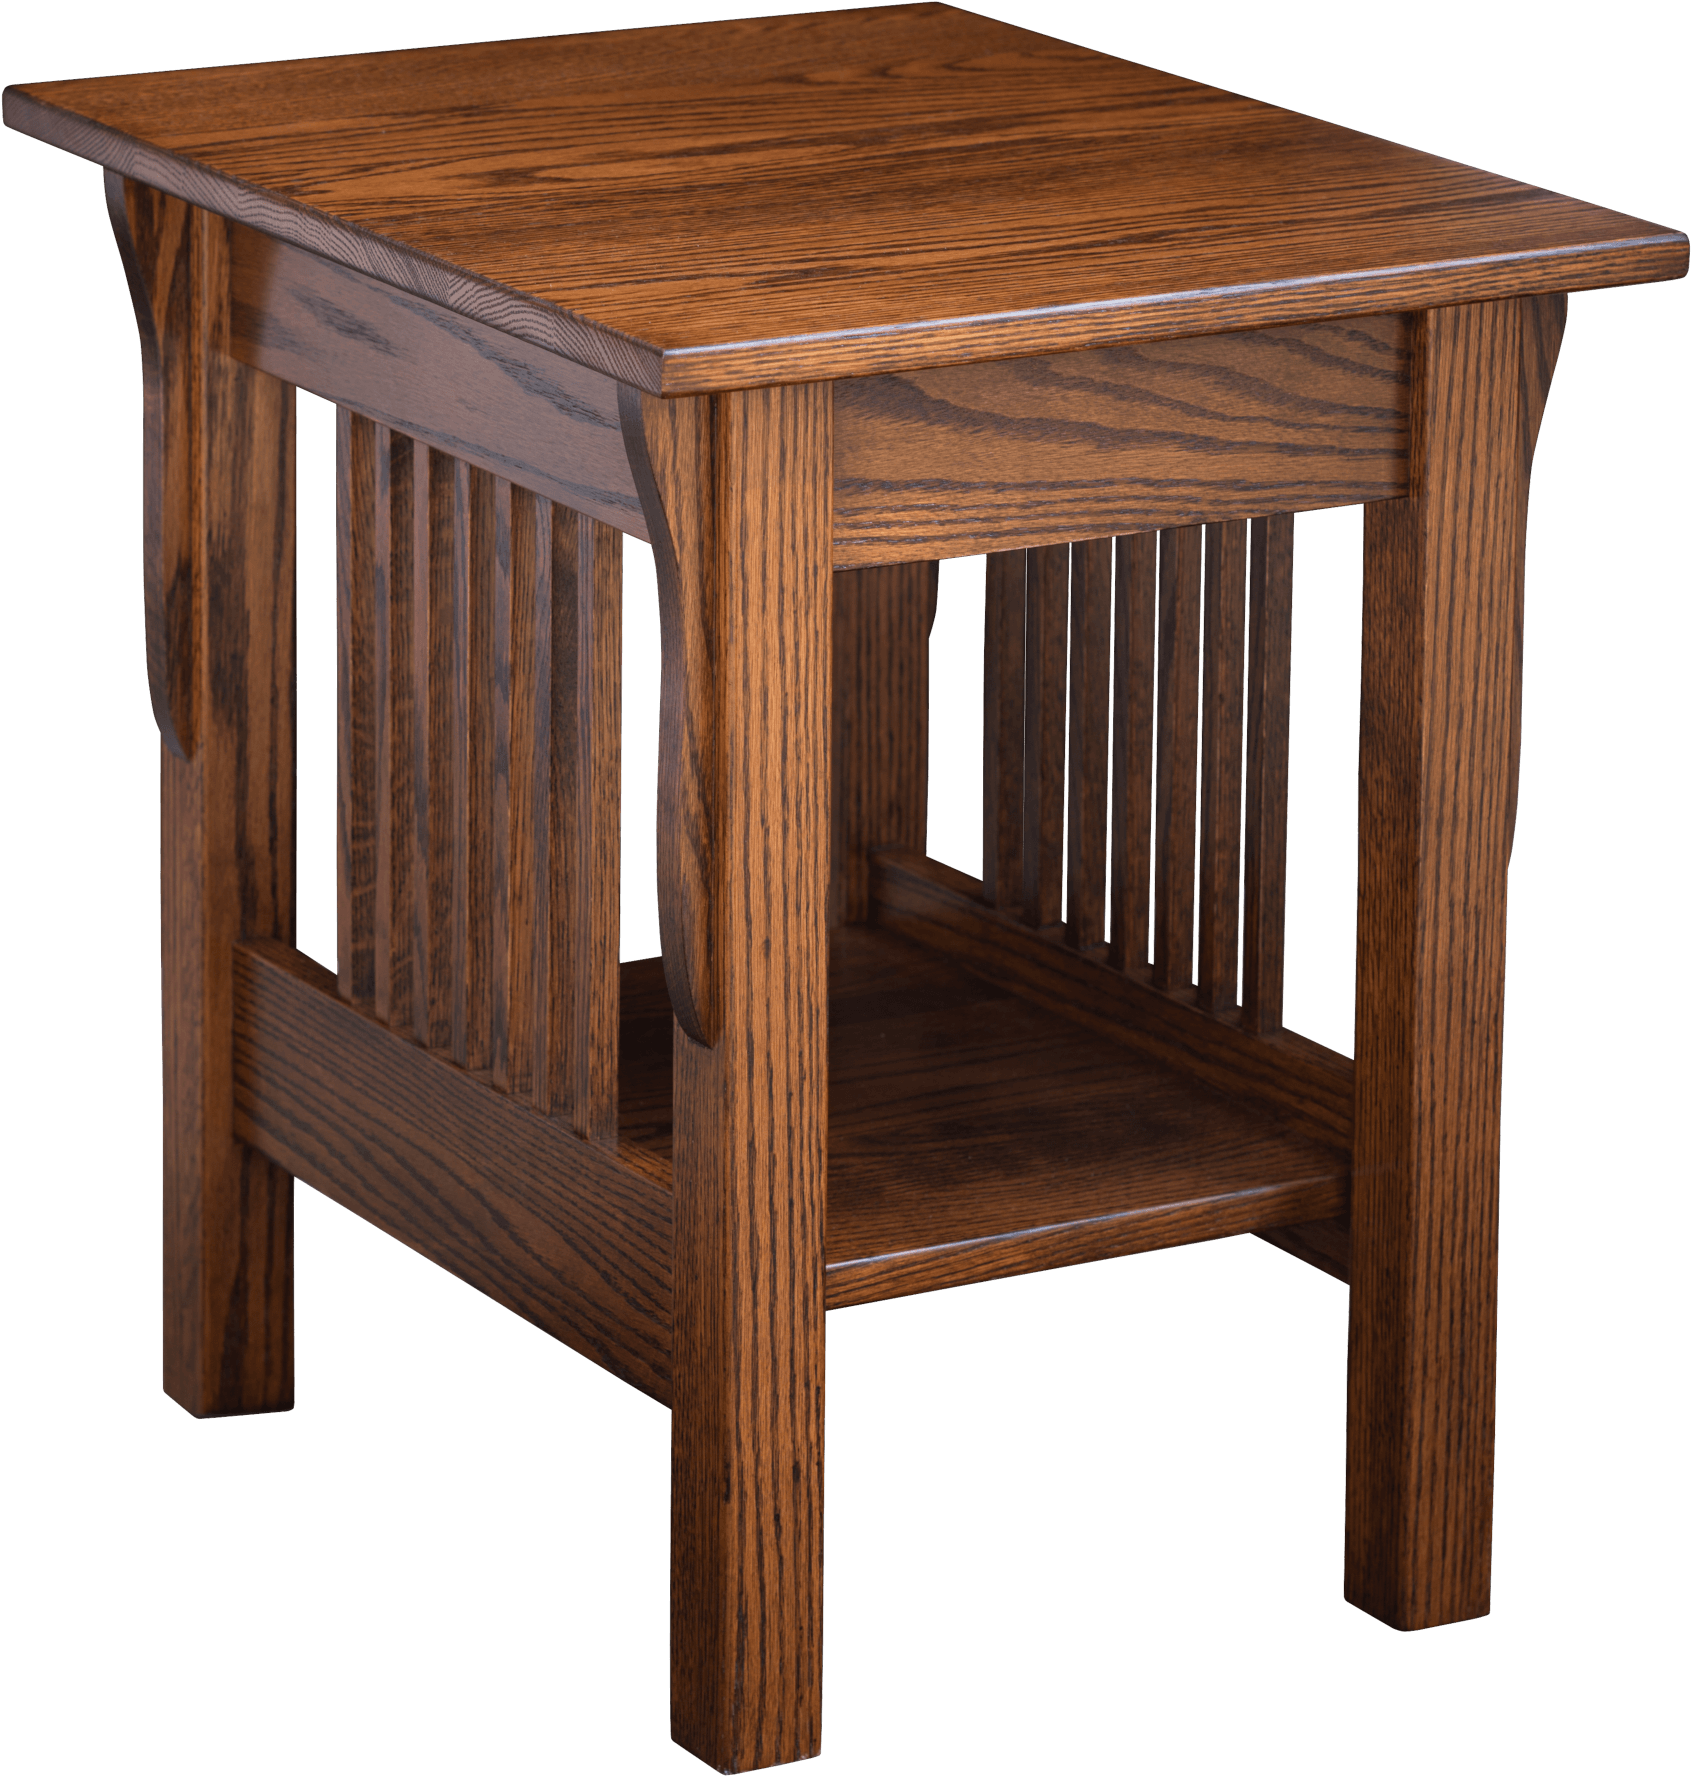 A Wooden End Table With A Shelf